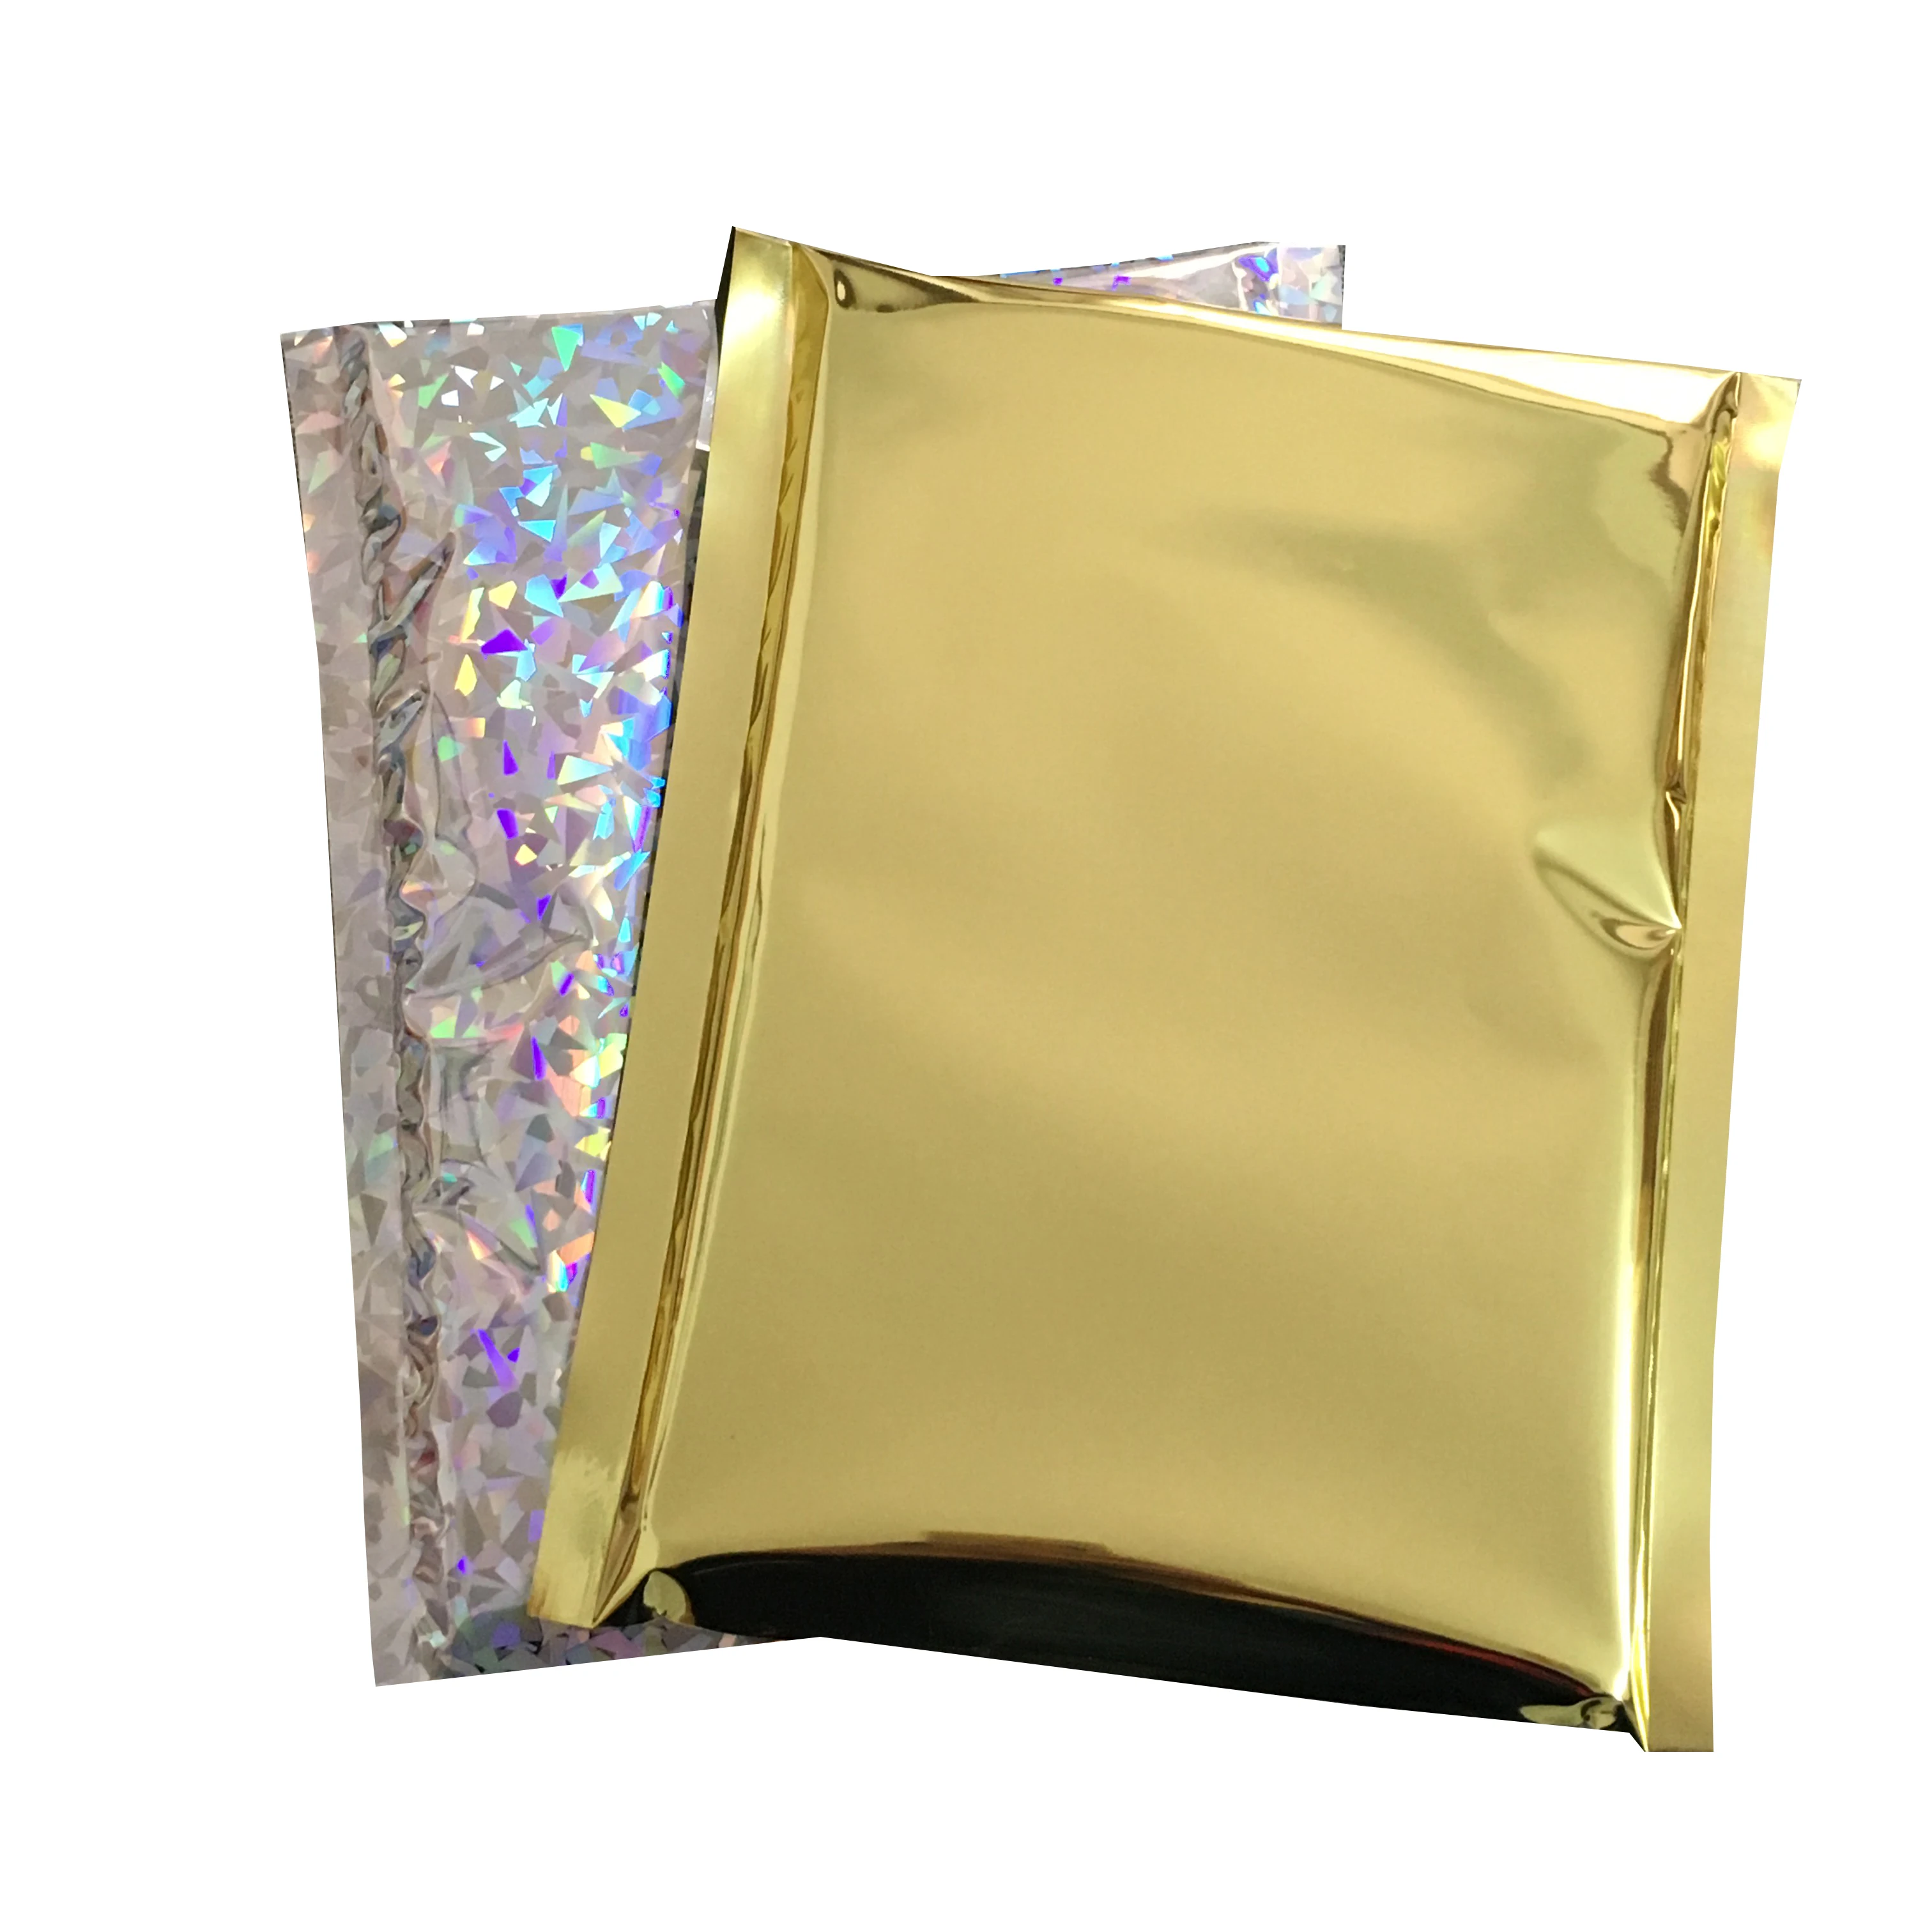 1000 Metallic Silver Holographic Foil Mailing Bags 6.5"x9" 